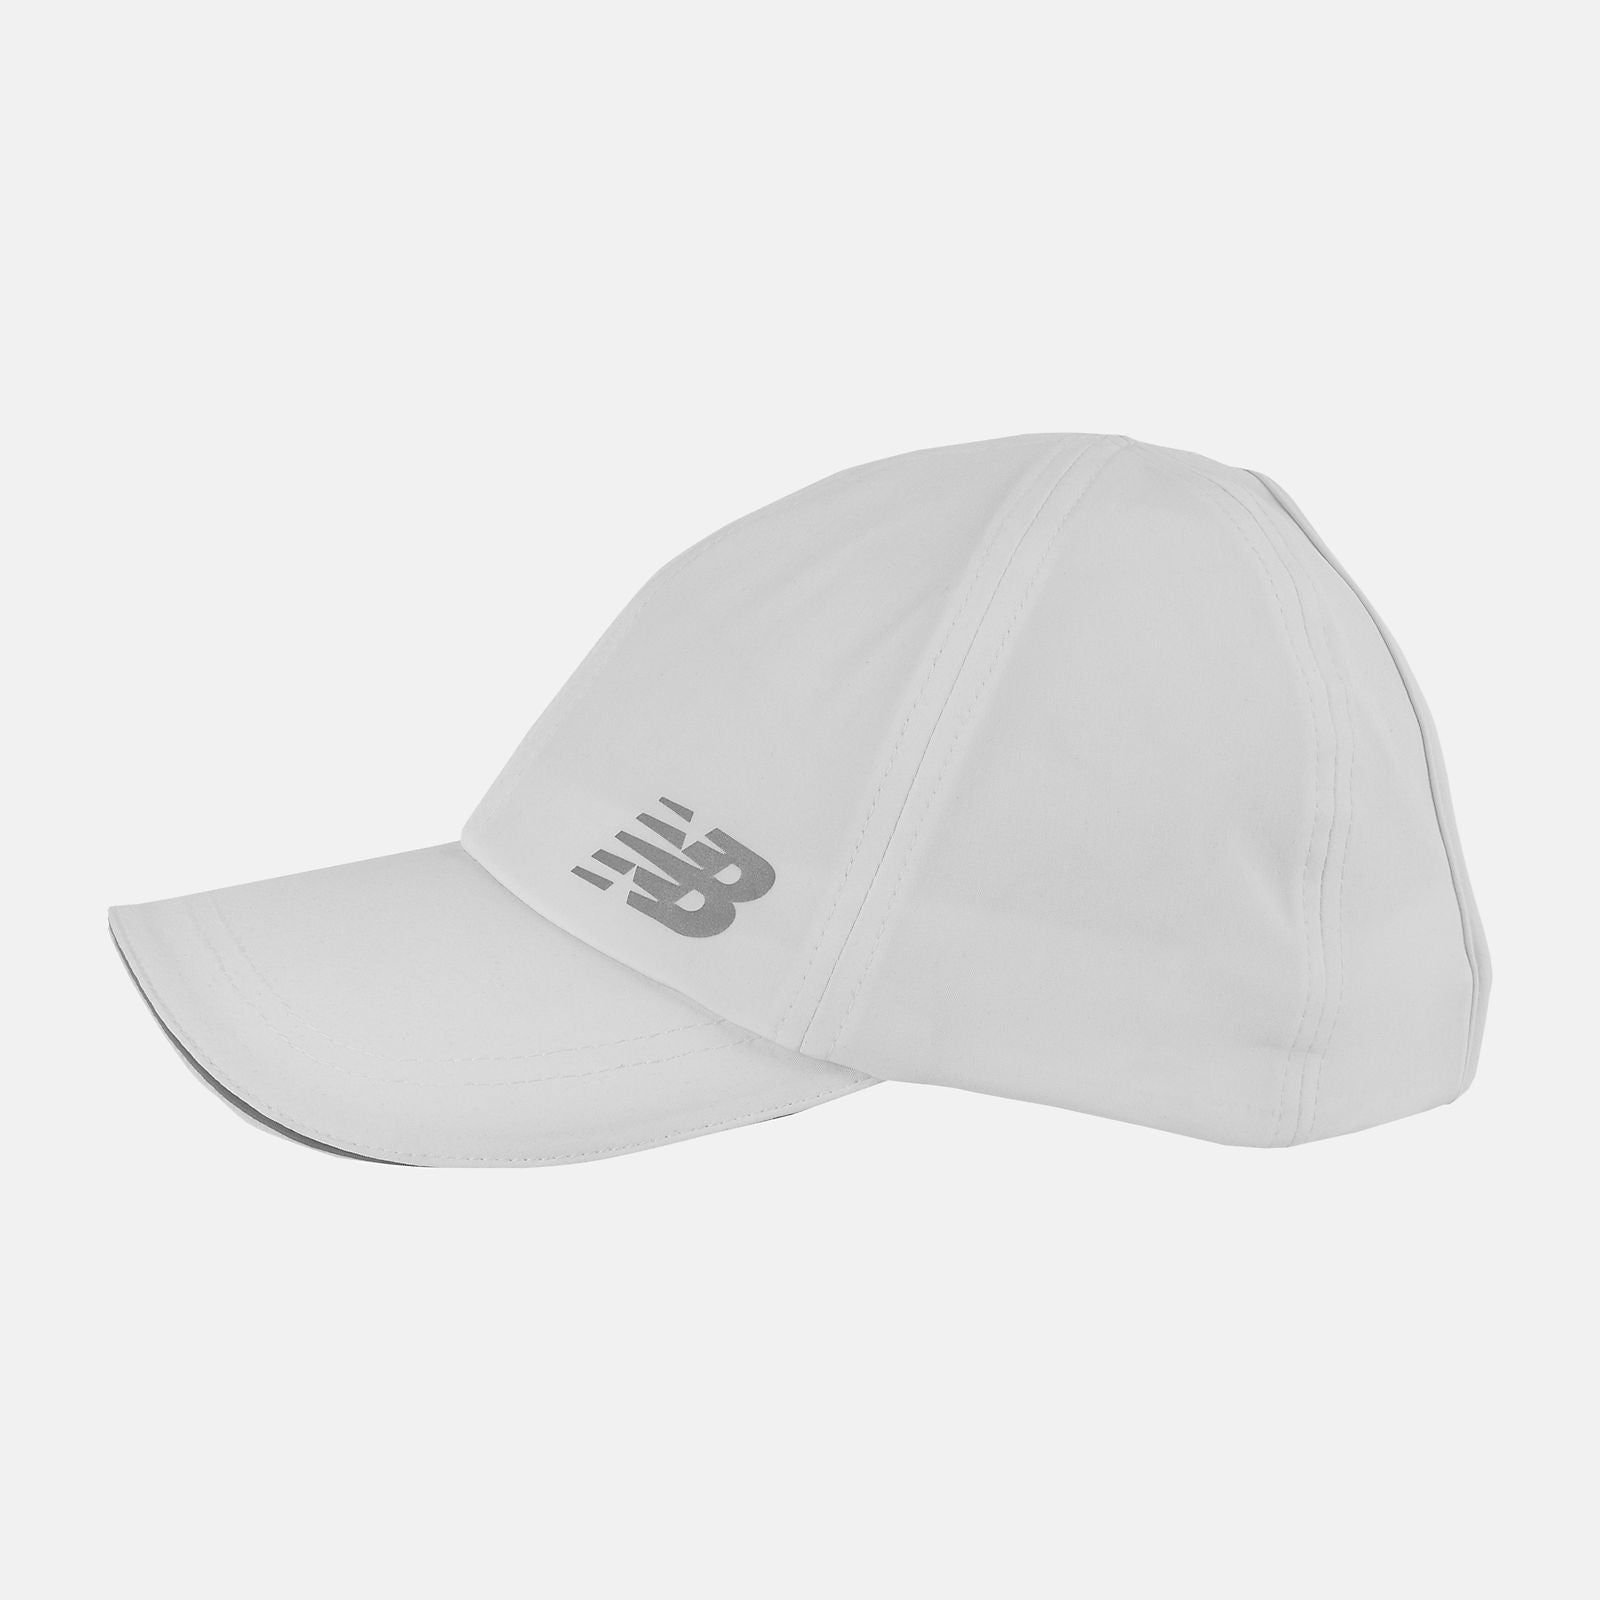 NEW BALANCE Women's High Pony Performance Hat in White LAH21103 O/S WHITE FROM EIGHTYWINGOLD - OFFICIAL BRAND PARTNER